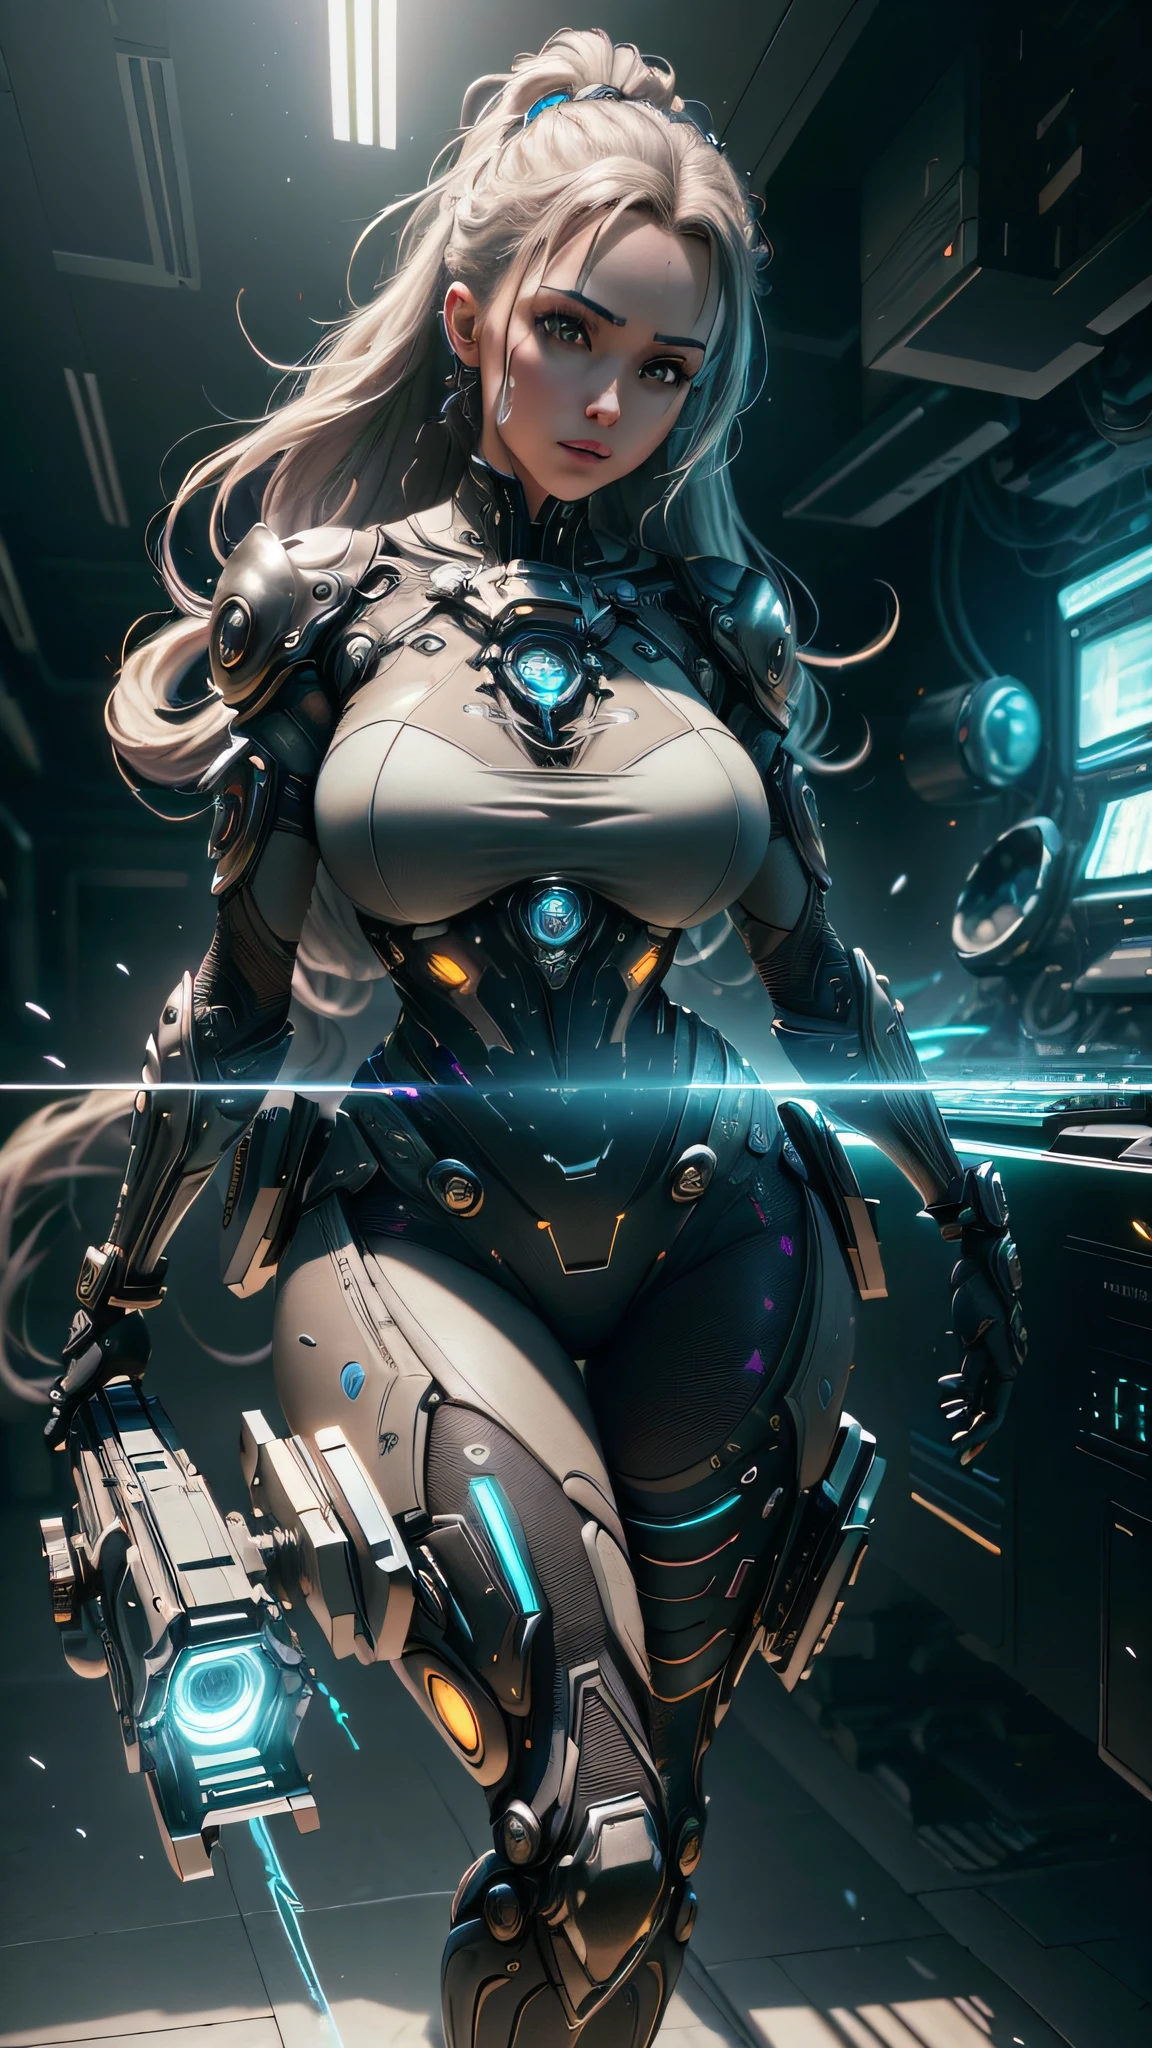 ((Best quality)), ((masterpiece)), (detailed:1.4), 3D, a beautiful cyberpunk female figure, thick hair, light particles, pure energy chaos anti-technology, HDR (High Dynamic Range), ray tracing, NVIDIA RTX, Super-Resolution, Unreal 5, Subsurface scattering, PBR TexturingPost-processing, Anisotropic Filtering, Depth-of-field, Maximum clarity and sharpness, Multi-layered textures, Albedo and Specular maps, Surface shading, Accurate Simulation of Light-Material Interactions, Perfect Proportions, Octane Render, two-tone illumination, large aperture, low ISO, white balance, rule of thirds, 8K RAW, legs apart